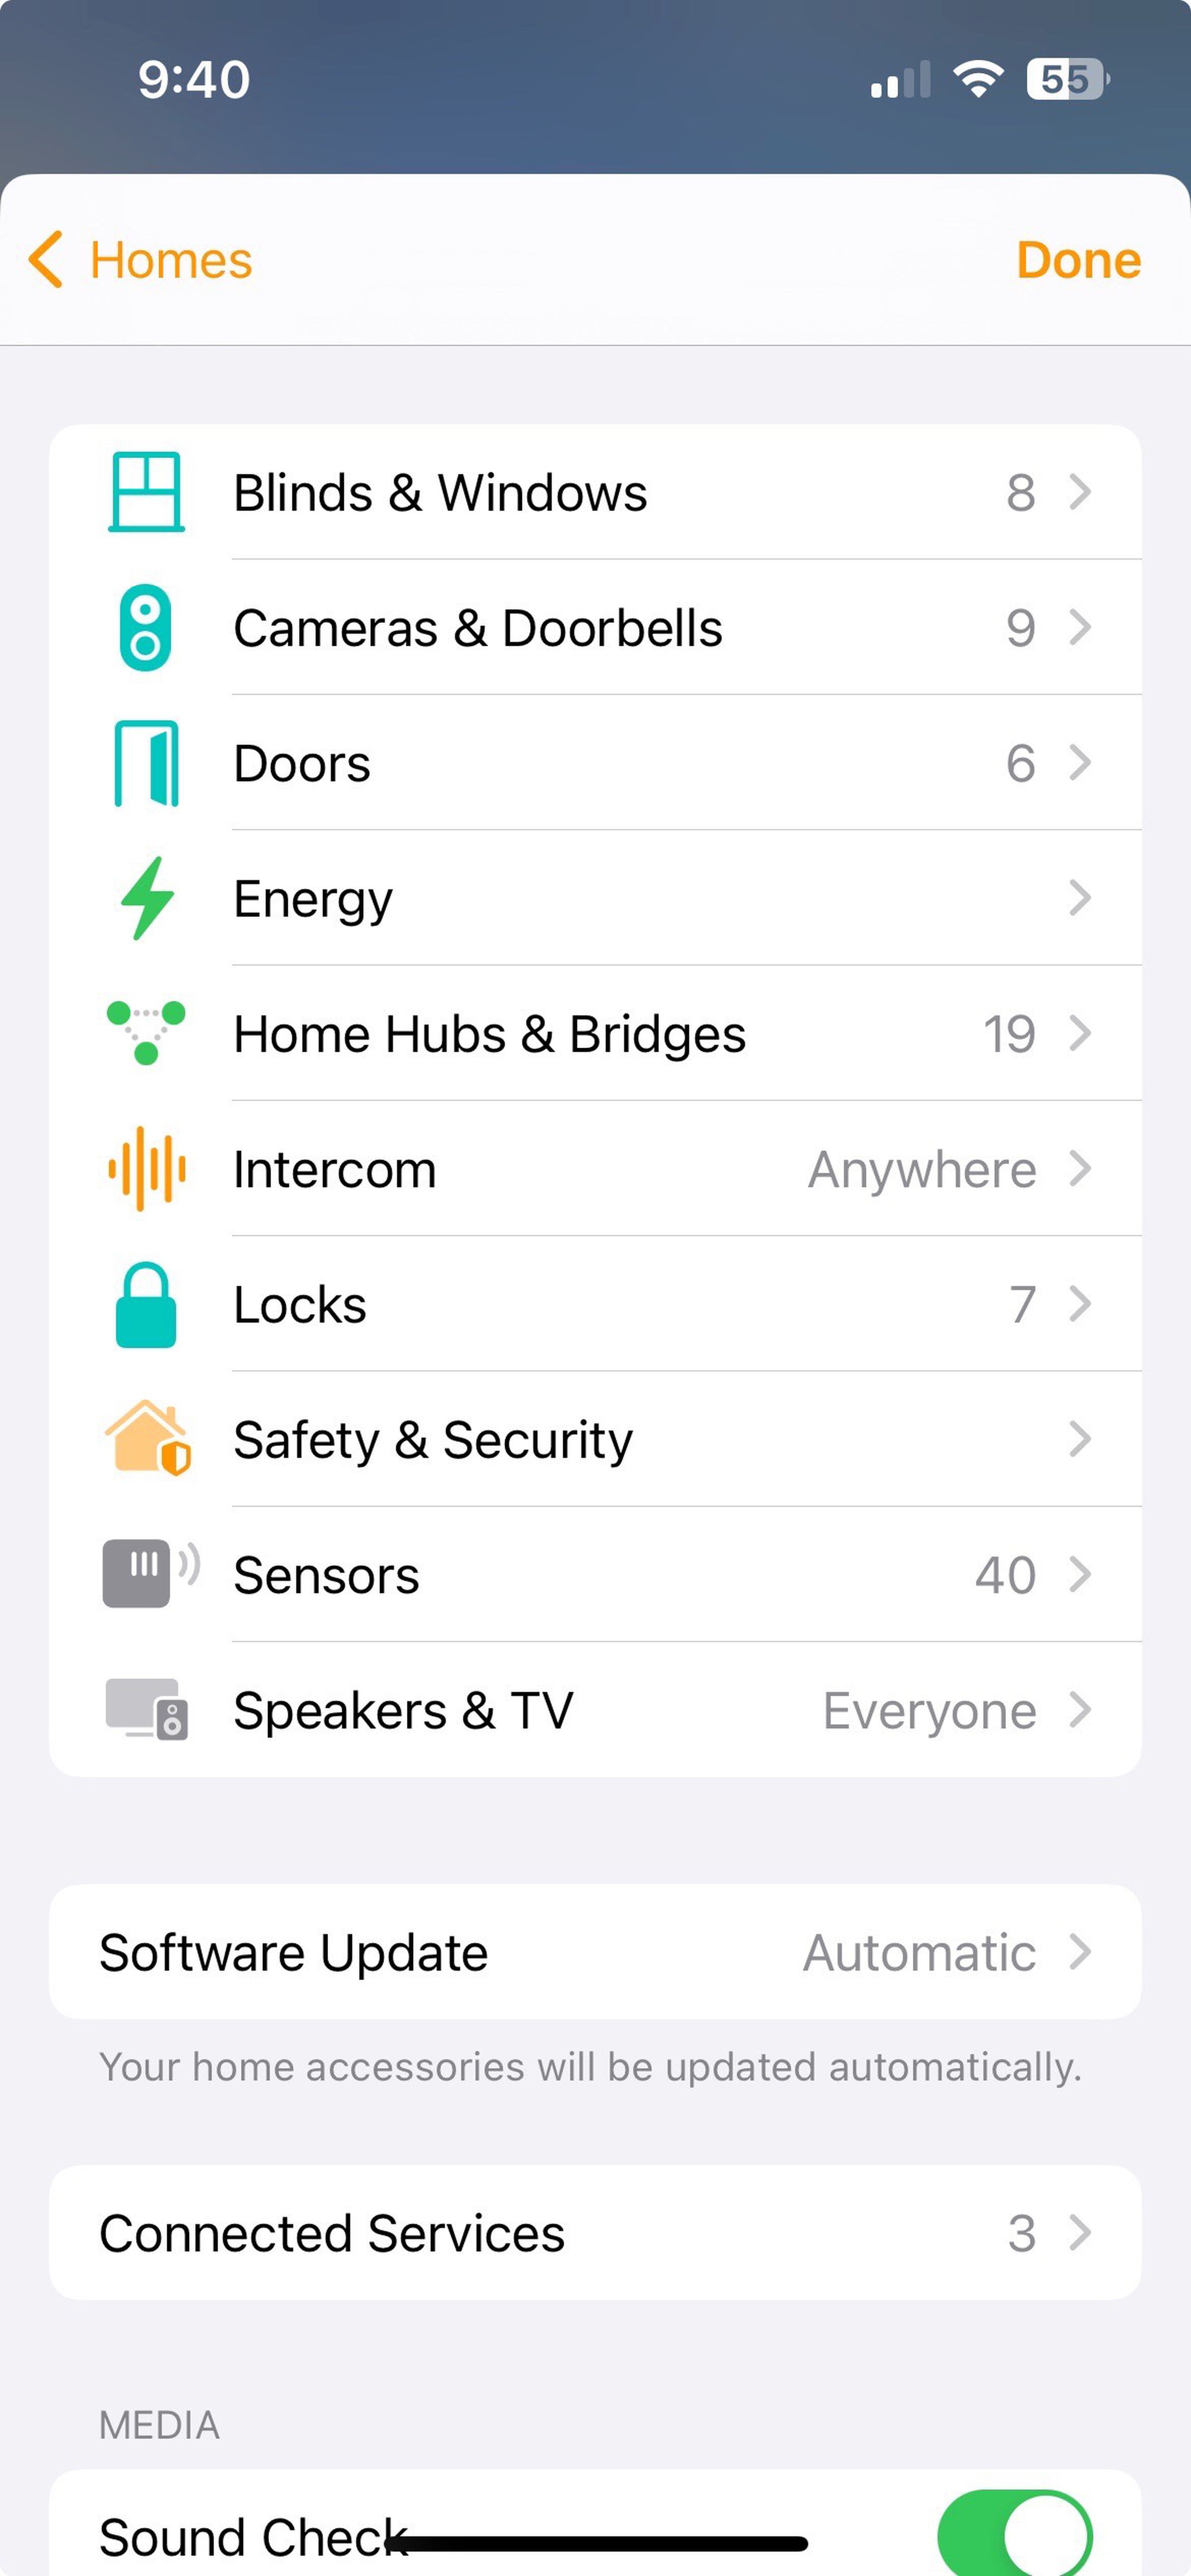 You can toggle the notifications on or off in a new Energy menu in the Home app’s Home Settings.